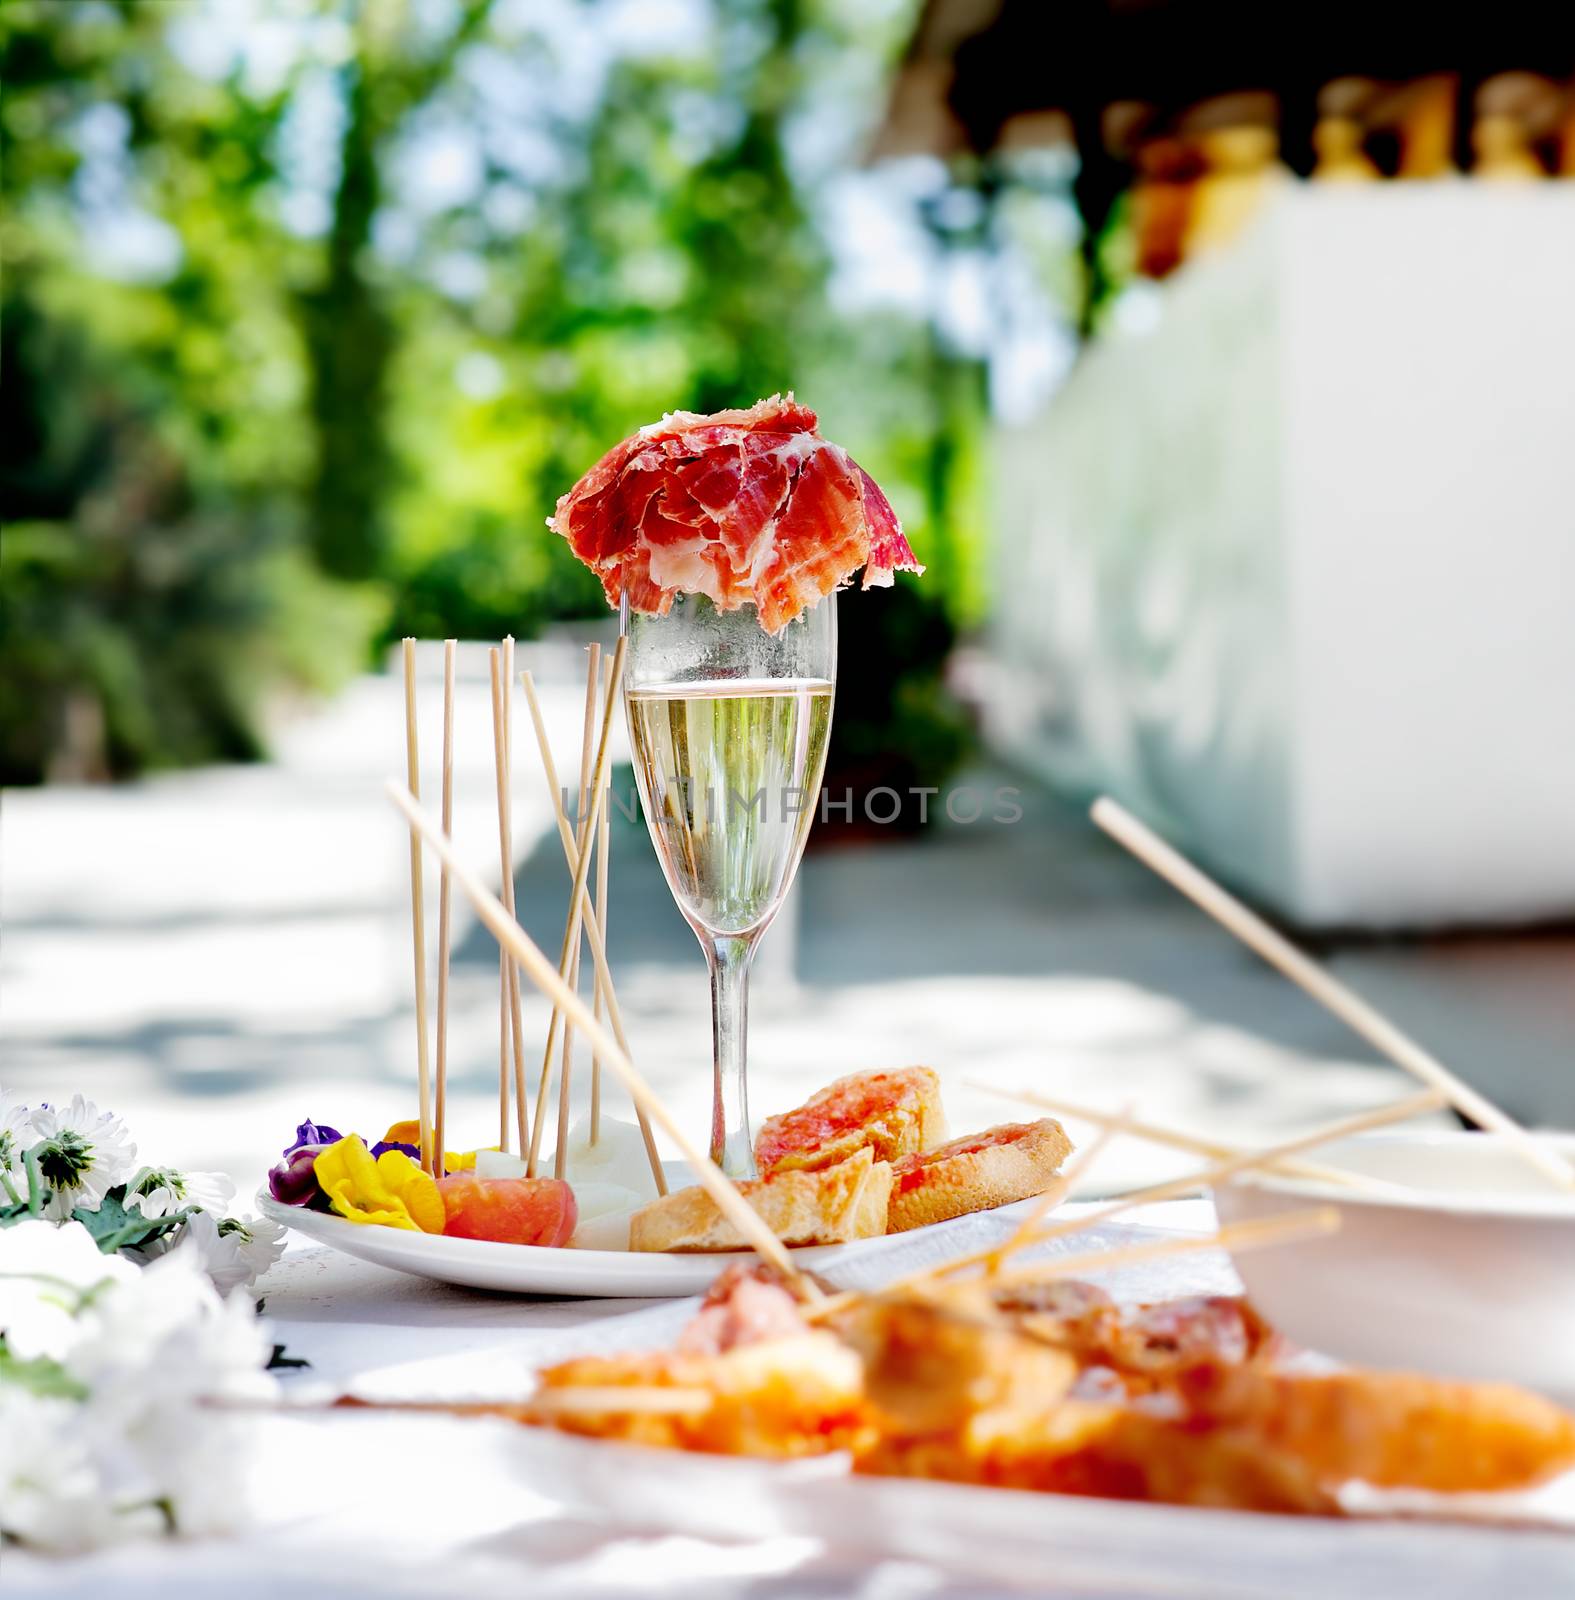 Outdoor catering. Food events and celebrations. Sliced ham and toast with champagne by Ainat